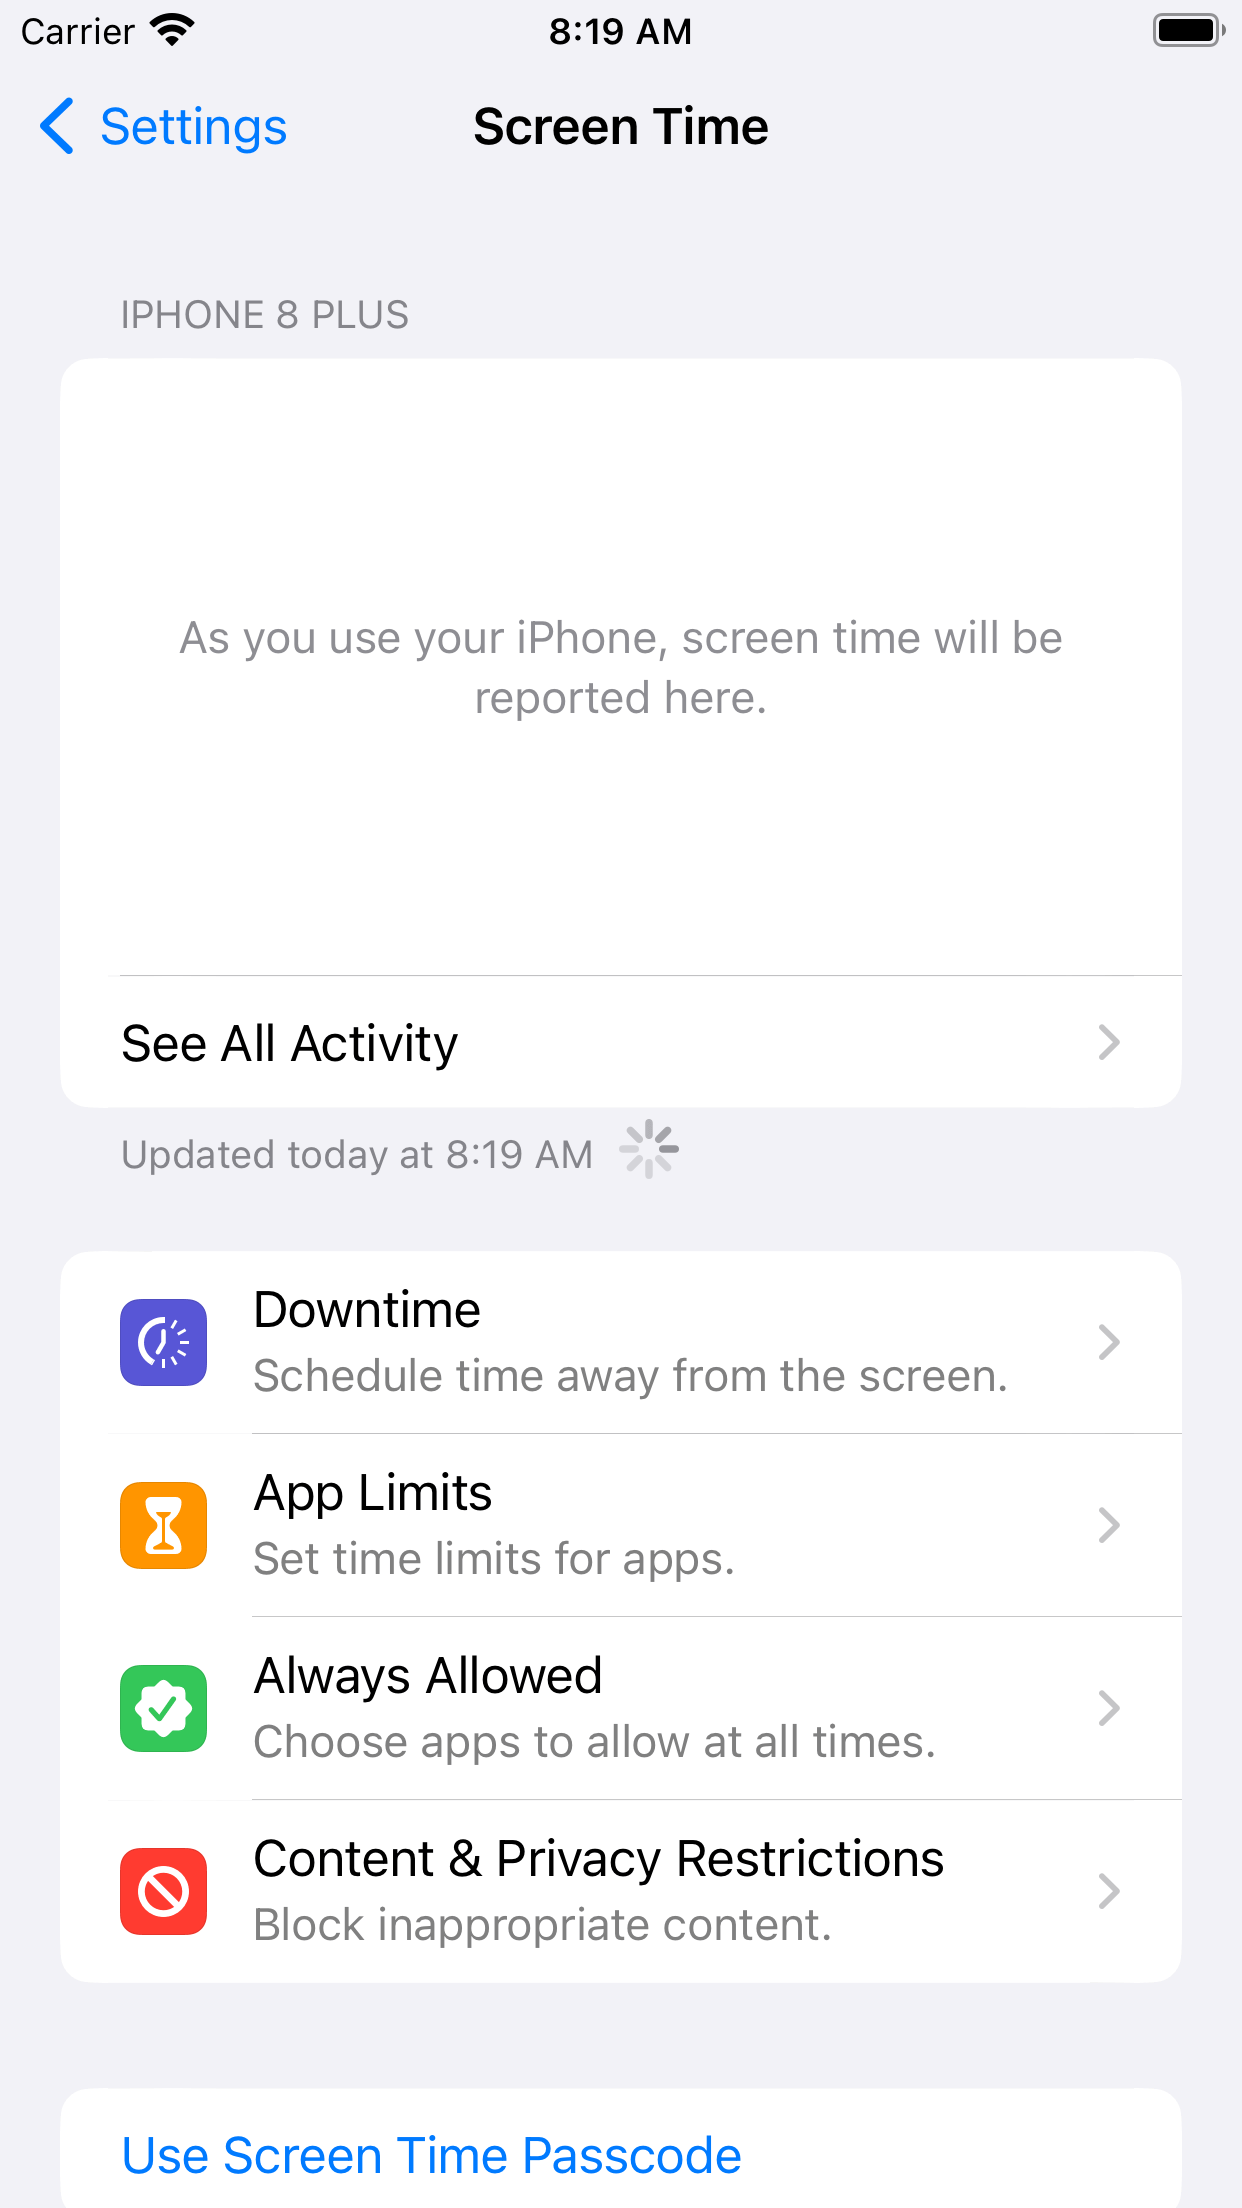 main screen of Screen Time showing App Limits, Downtime and more